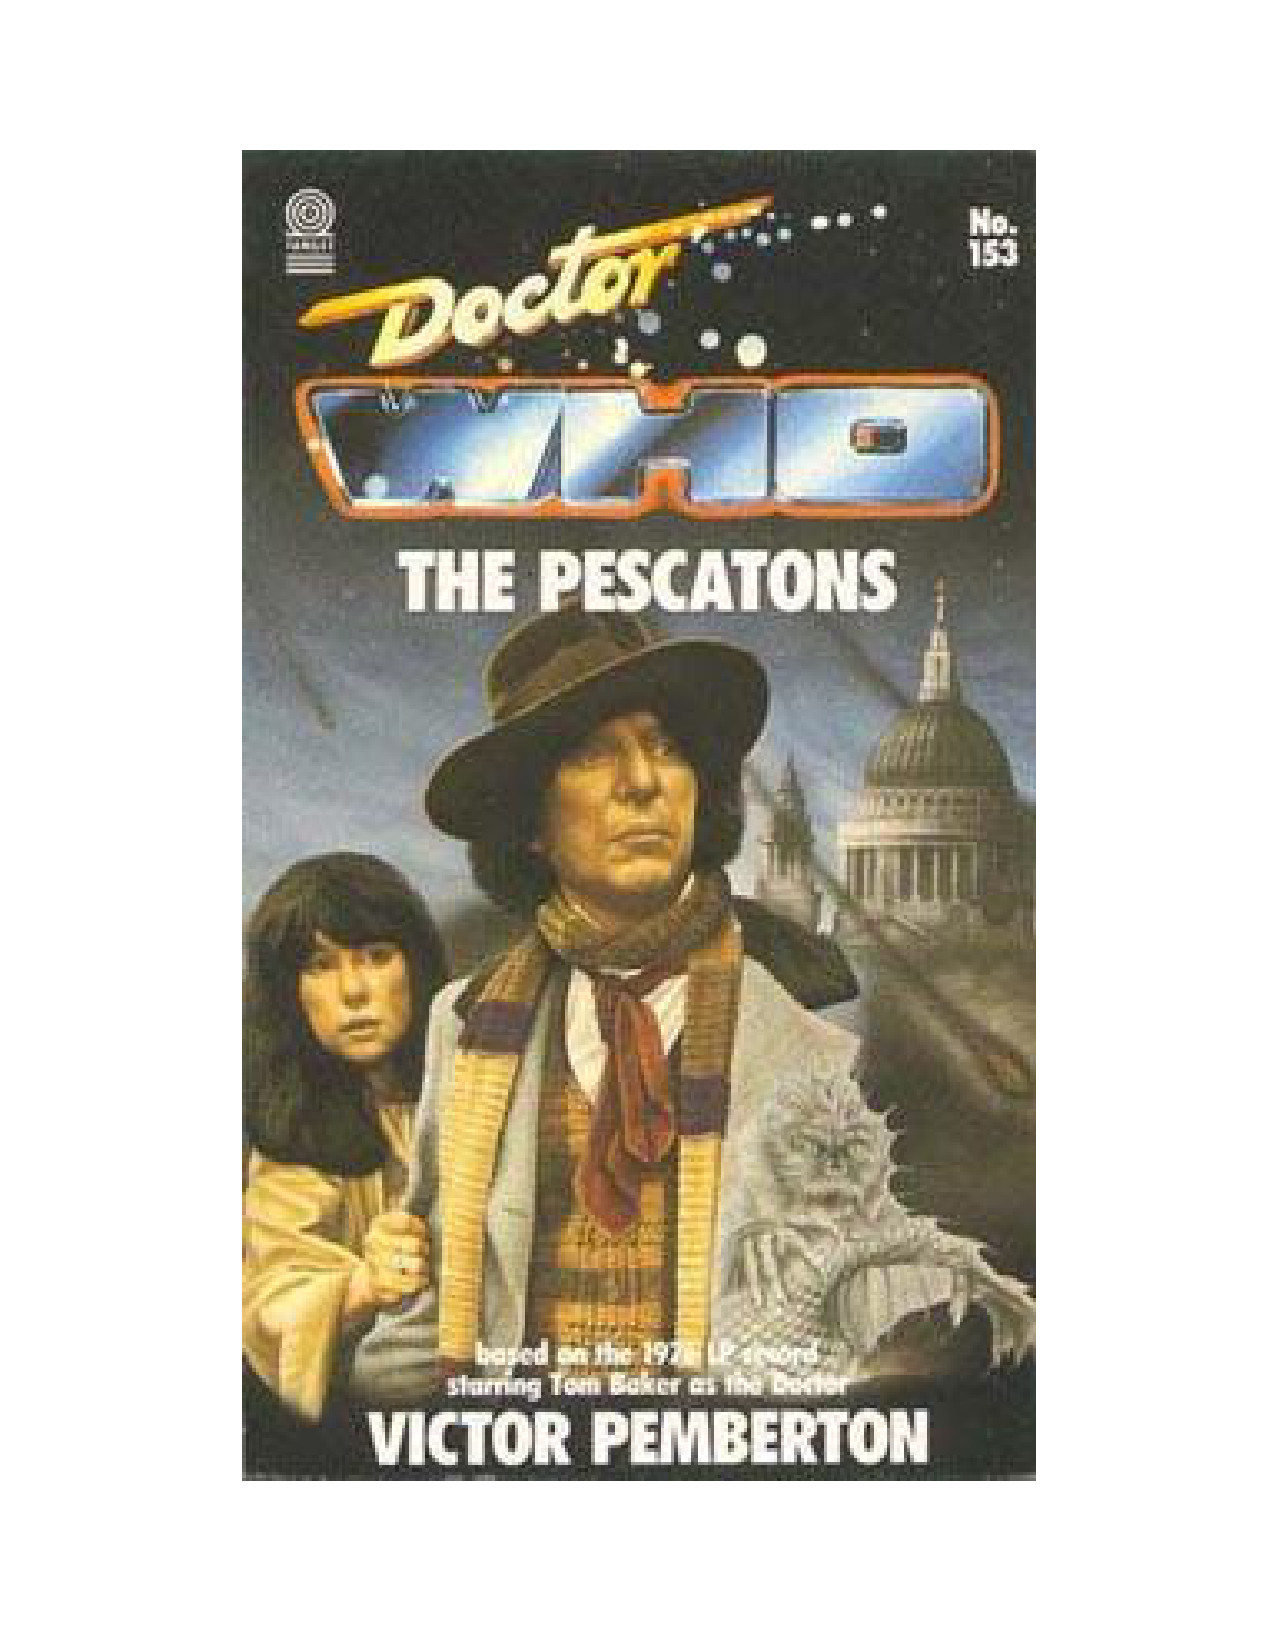 Doctor Who: The Pescatons